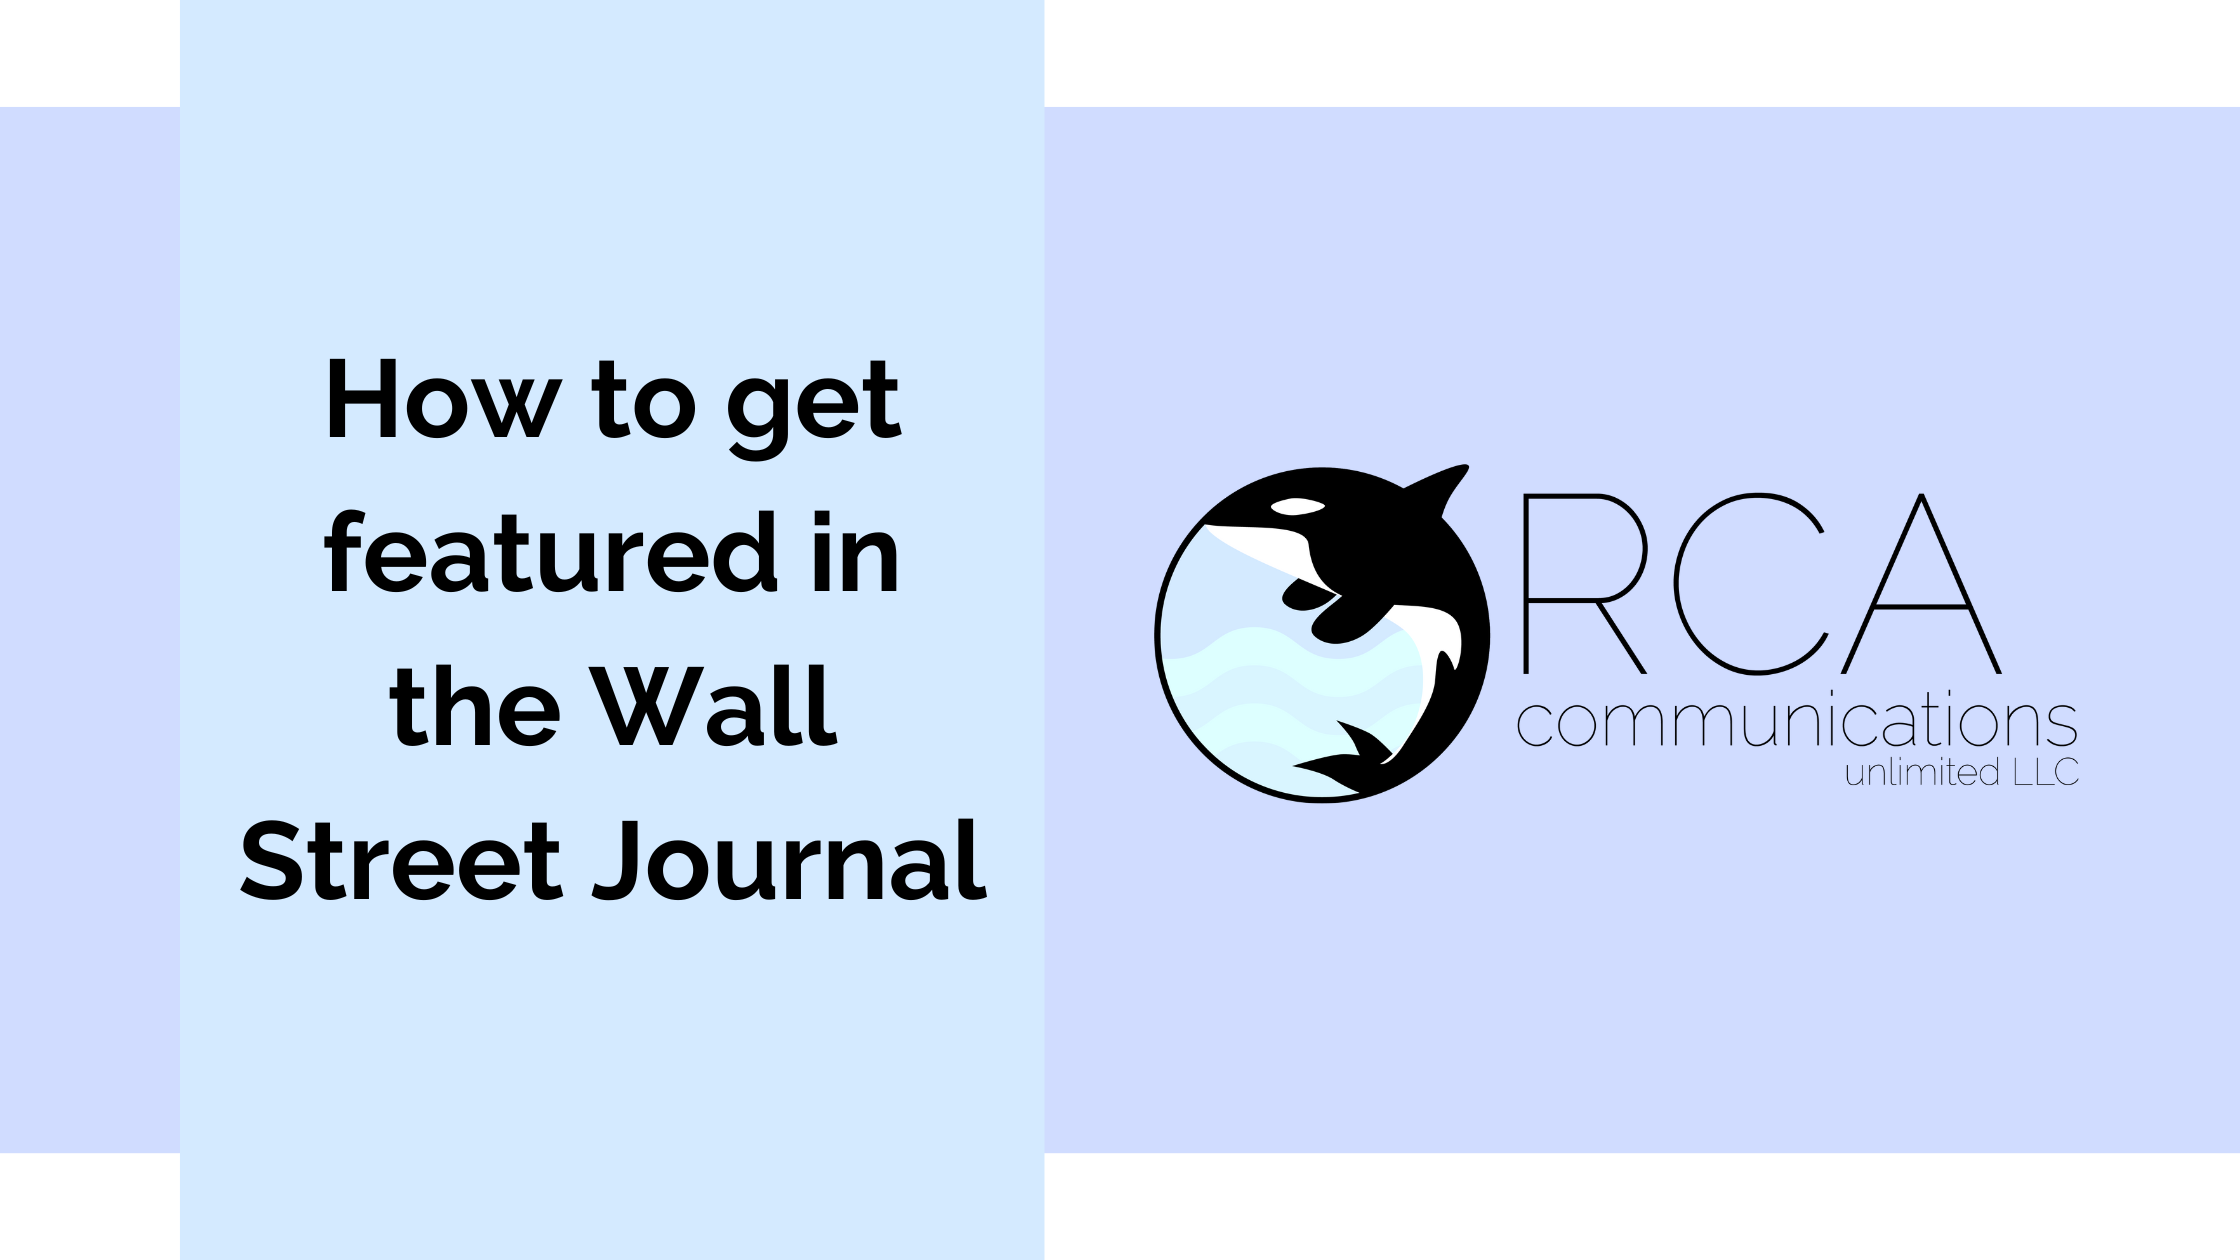 How to get featured in the Wall Street Journal